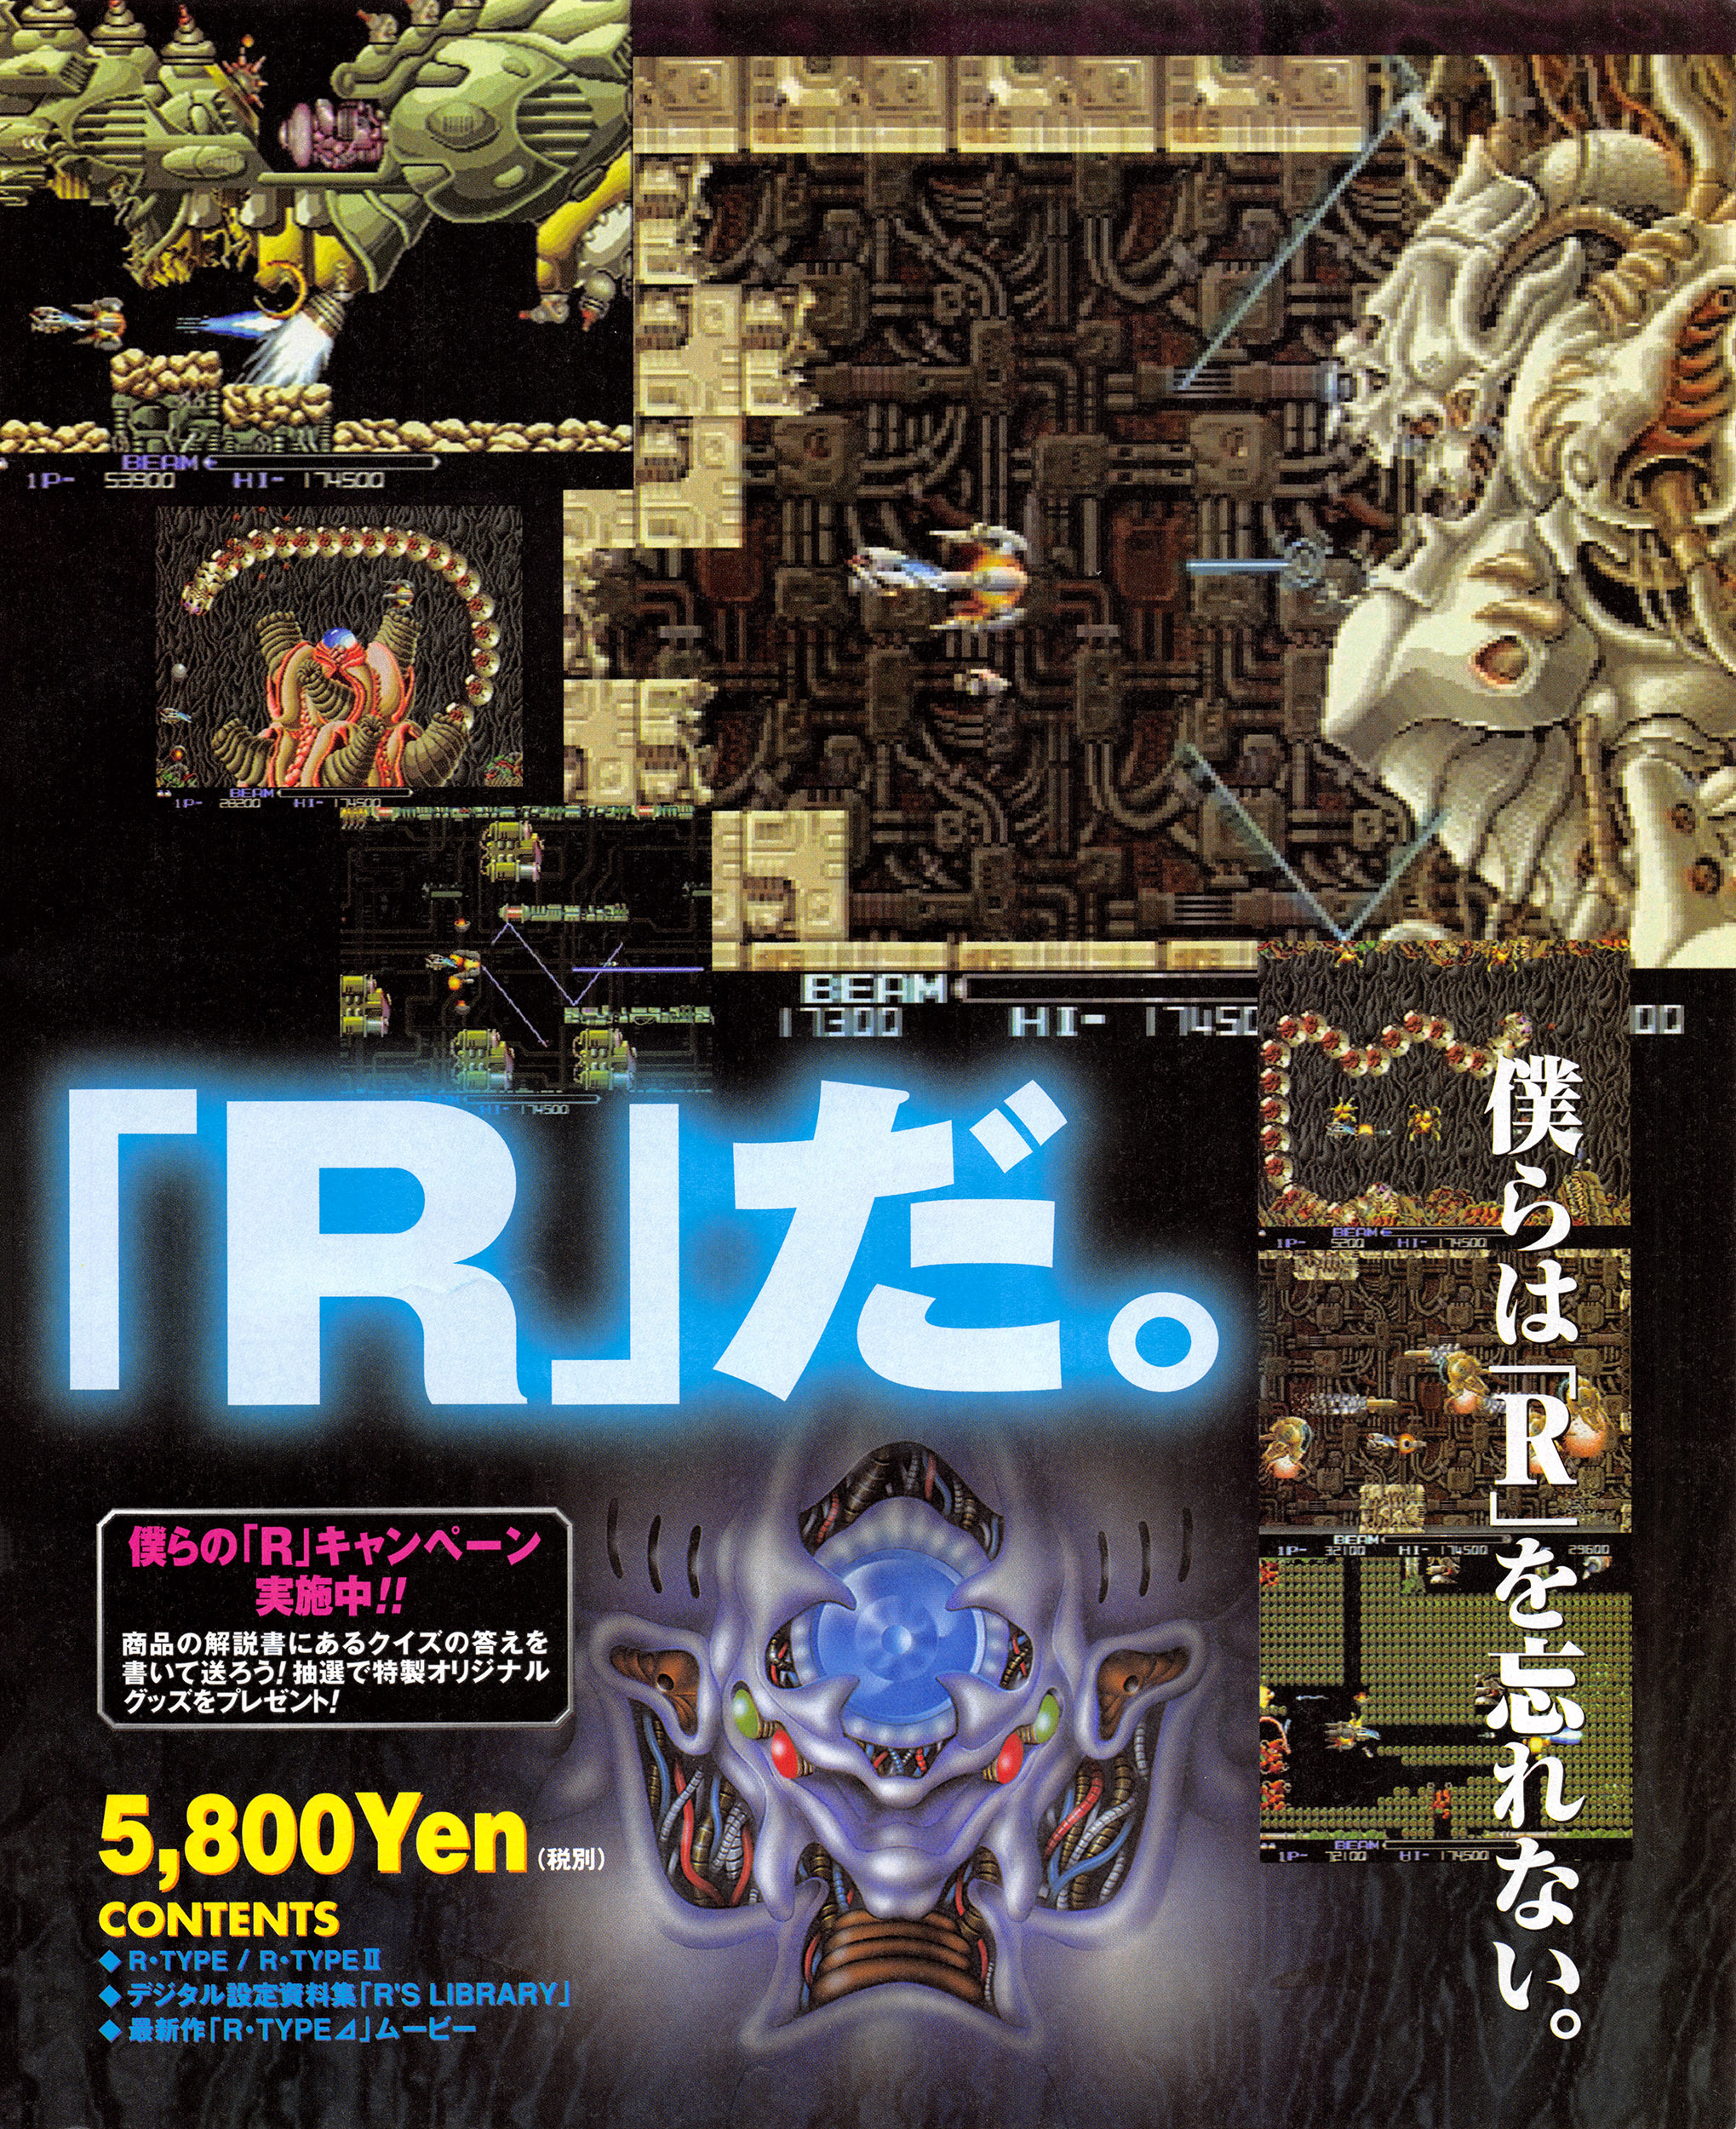 R-Types PSX cover